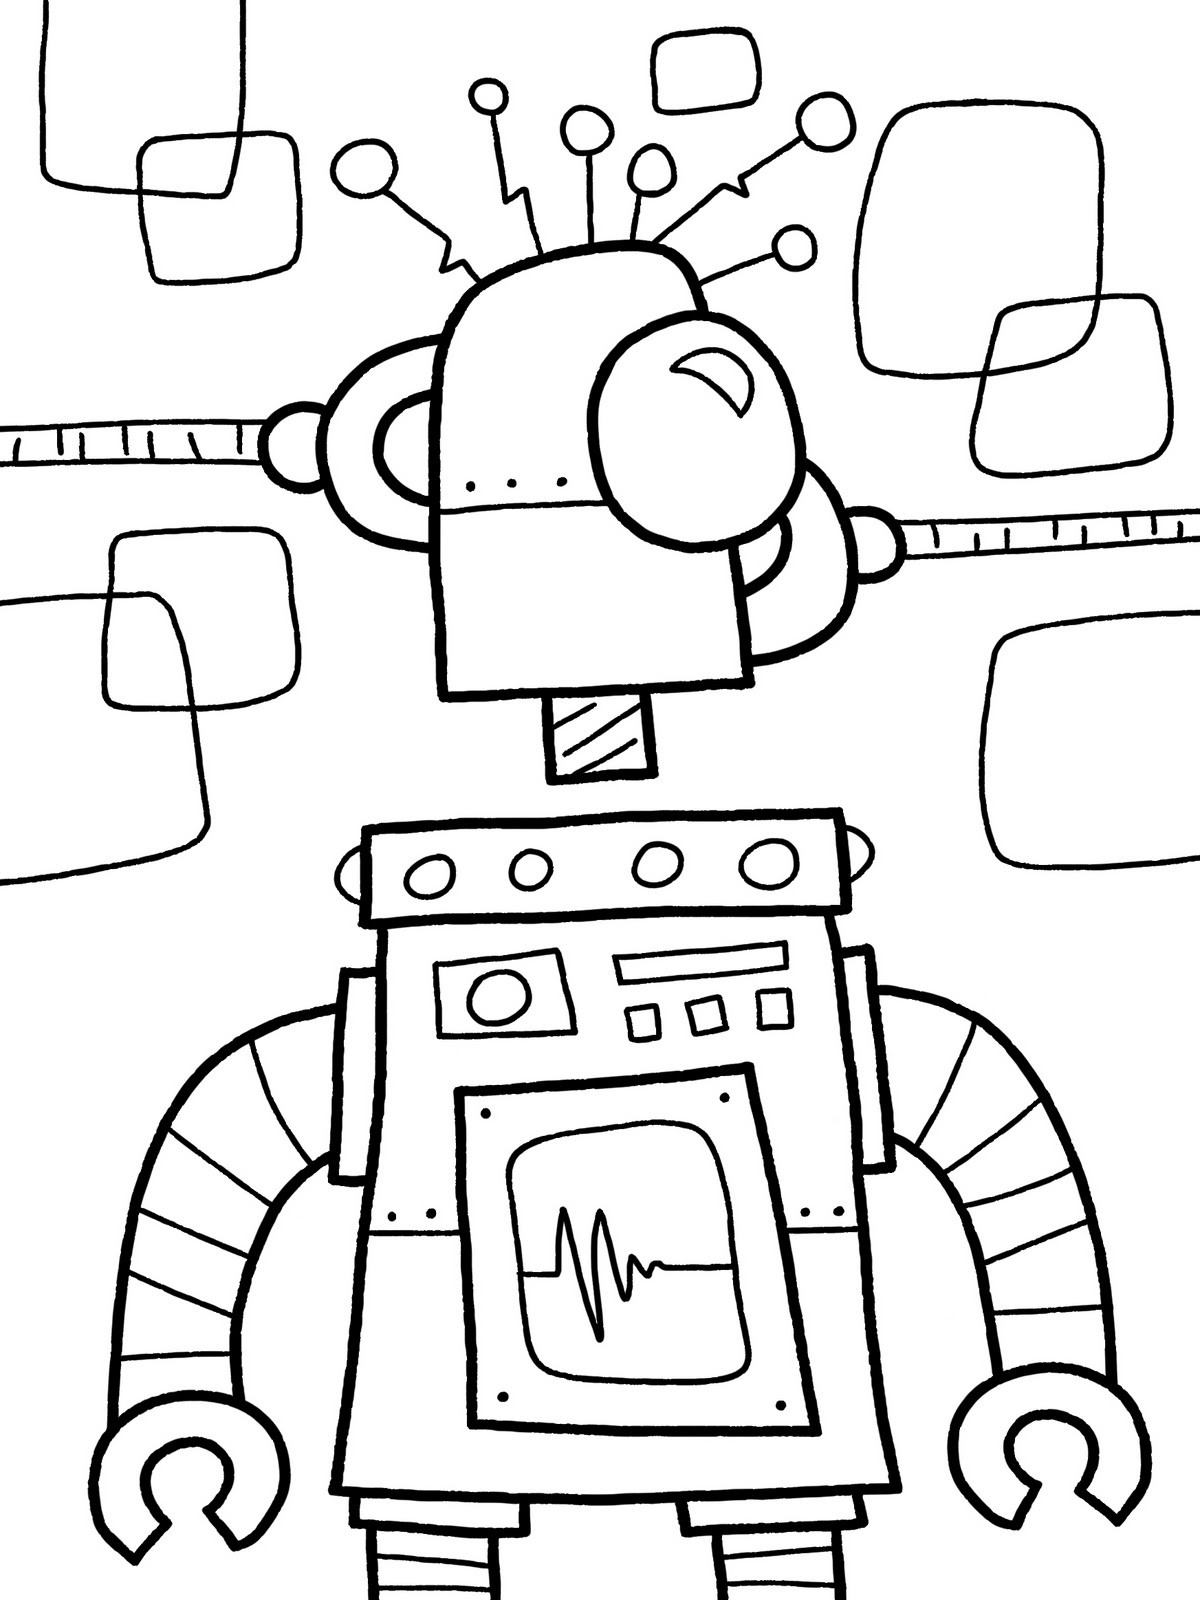 Free Printable Coloring Pages For Children
 Free Printable Robot Coloring Pages For Kids